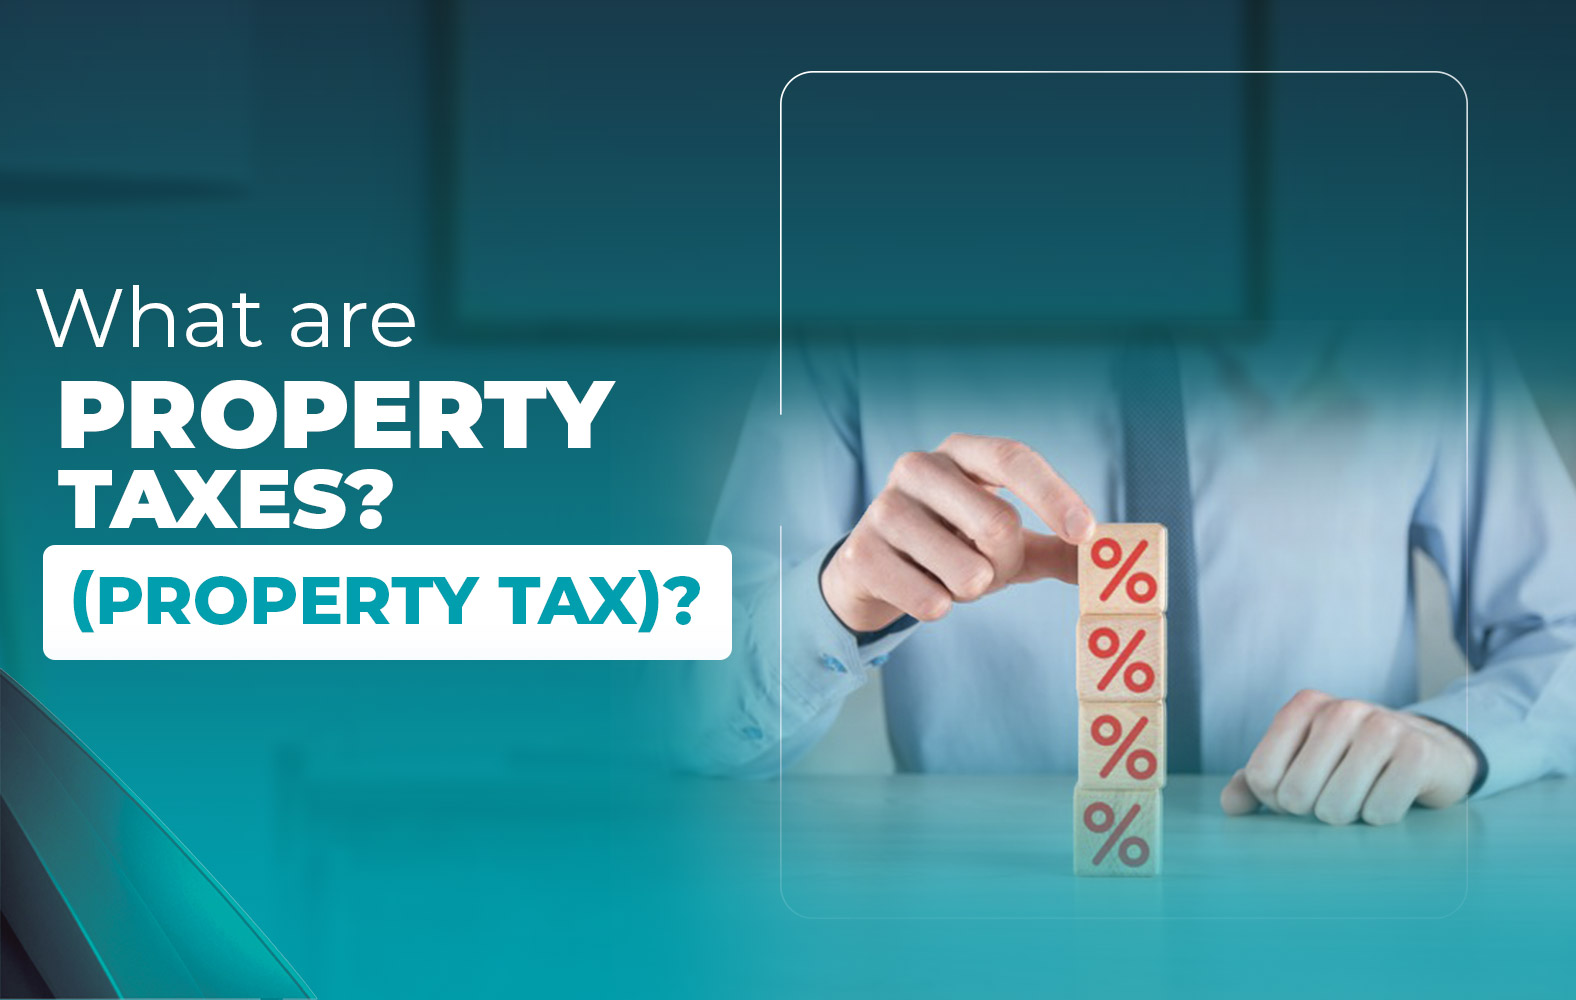 What are property taxes? (property tax)